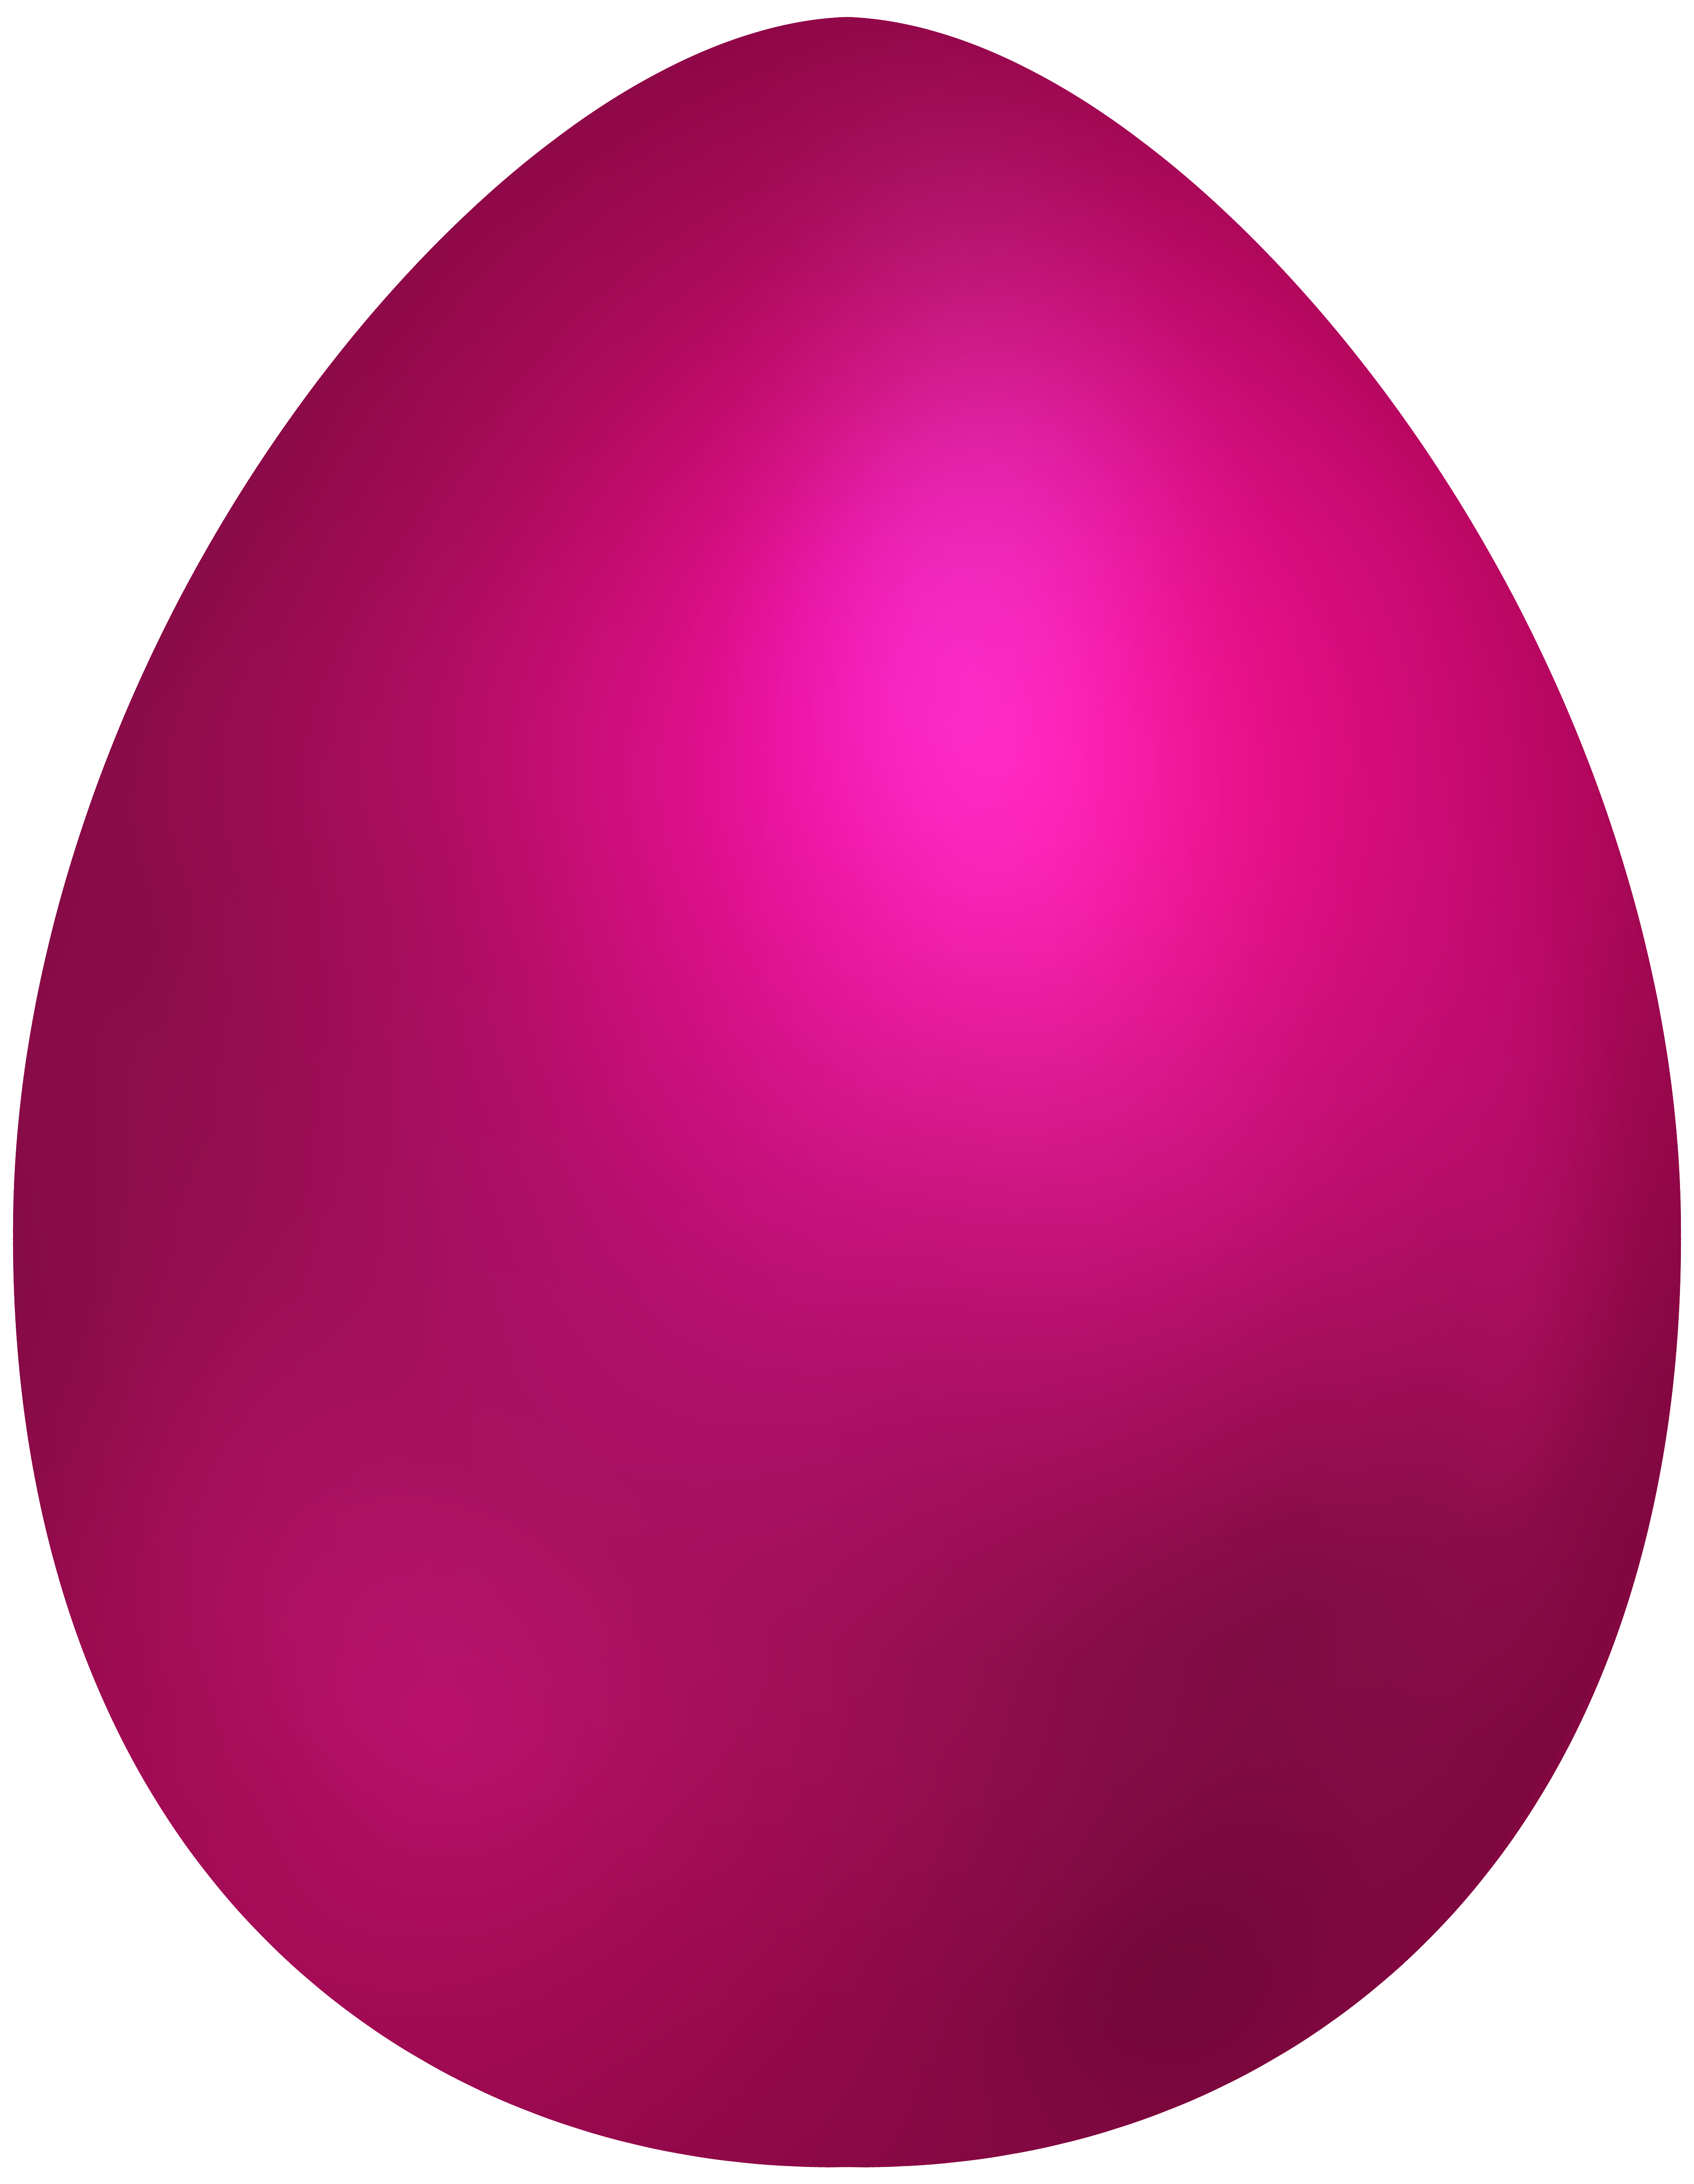 Pasqua pink png clip. Gold clipart easter egg